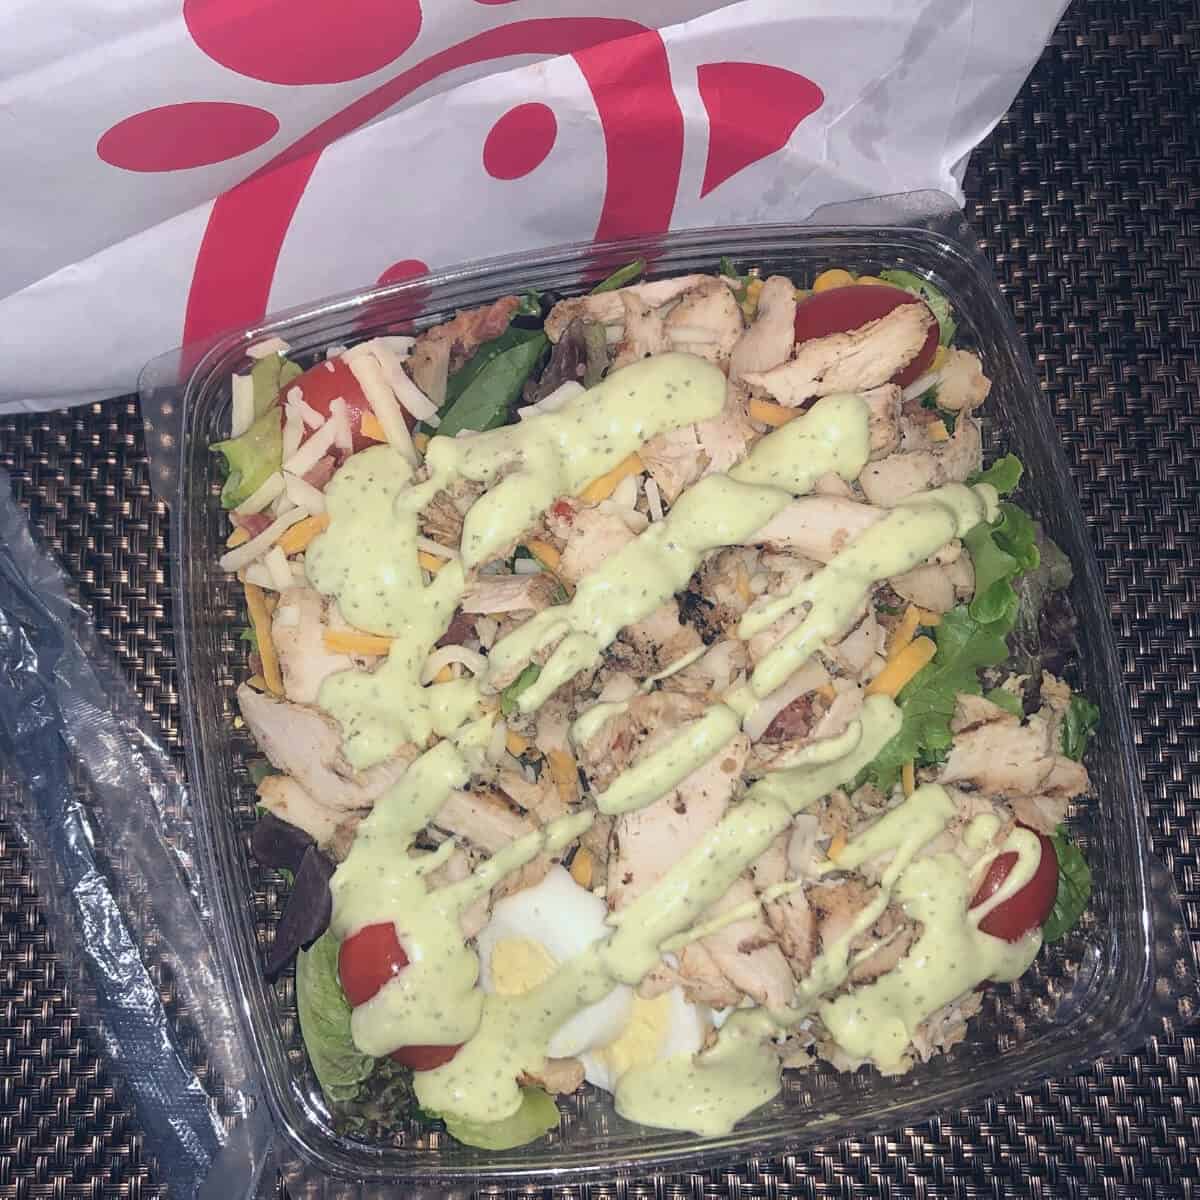 chick-fil-a keto featured image